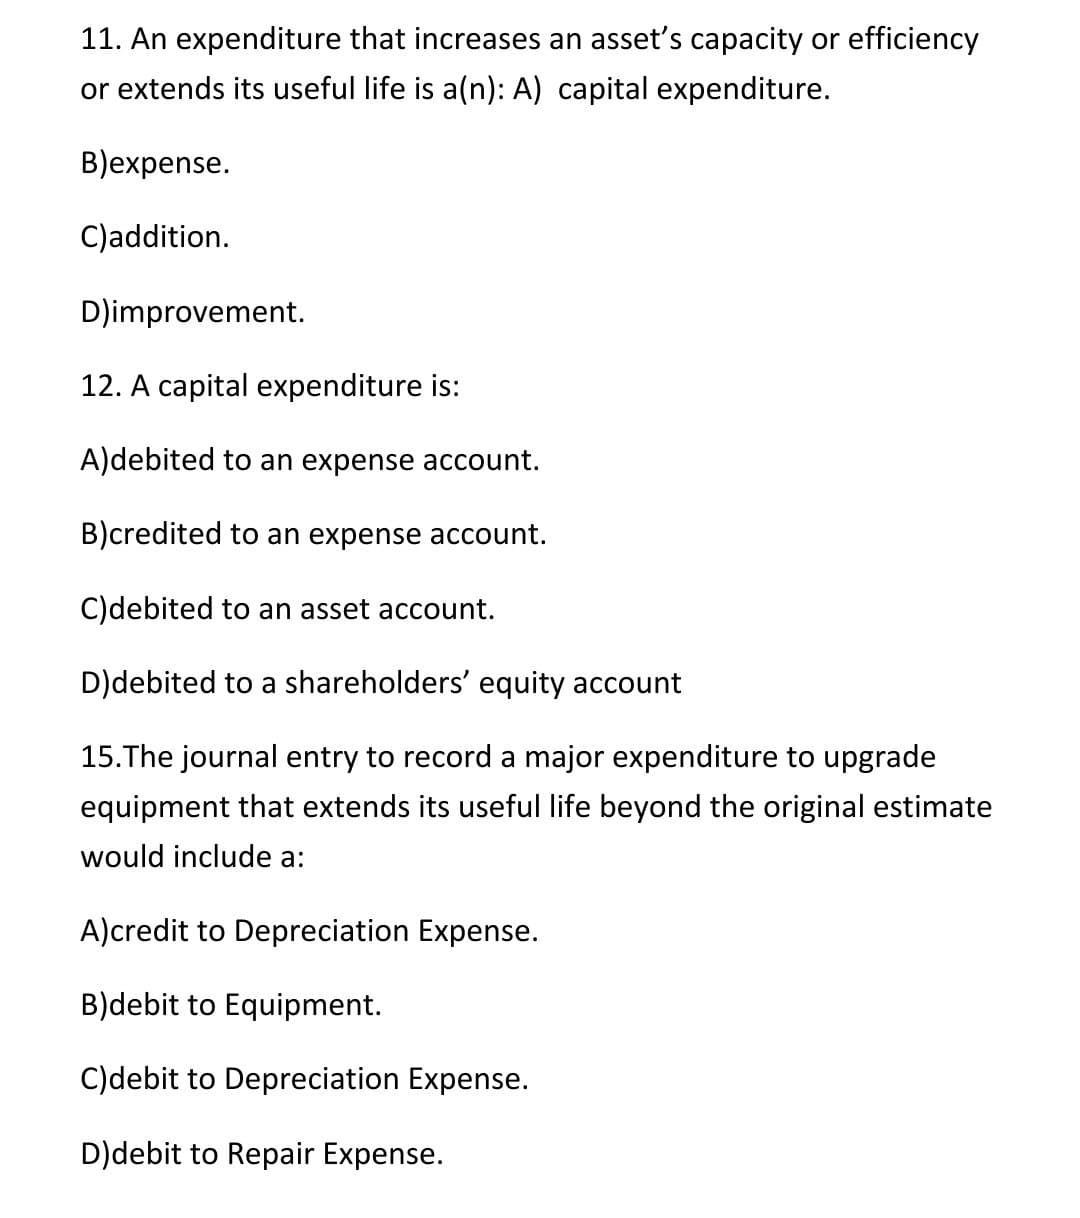 11. An expenditure that increases an asset's capacity or efficiency
or extends its useful life is a(n): A) capital expenditure.
B)expense.
C)addition.
D)improvement.
12. A capital expenditure is:
A)debited to an expense account.
B)credited to an expense account.
C)debited to an asset account.
D)debited to a shareholders' equity account
15.The journal entry to record a major expenditure to upgrade
equipment that extends its useful life beyond the original estimate
would include a:
A)credit to Depreciation Expense.
B)debit to Equipment.
C)debit to Depreciation Expense.
D)debit to Repair Expense.